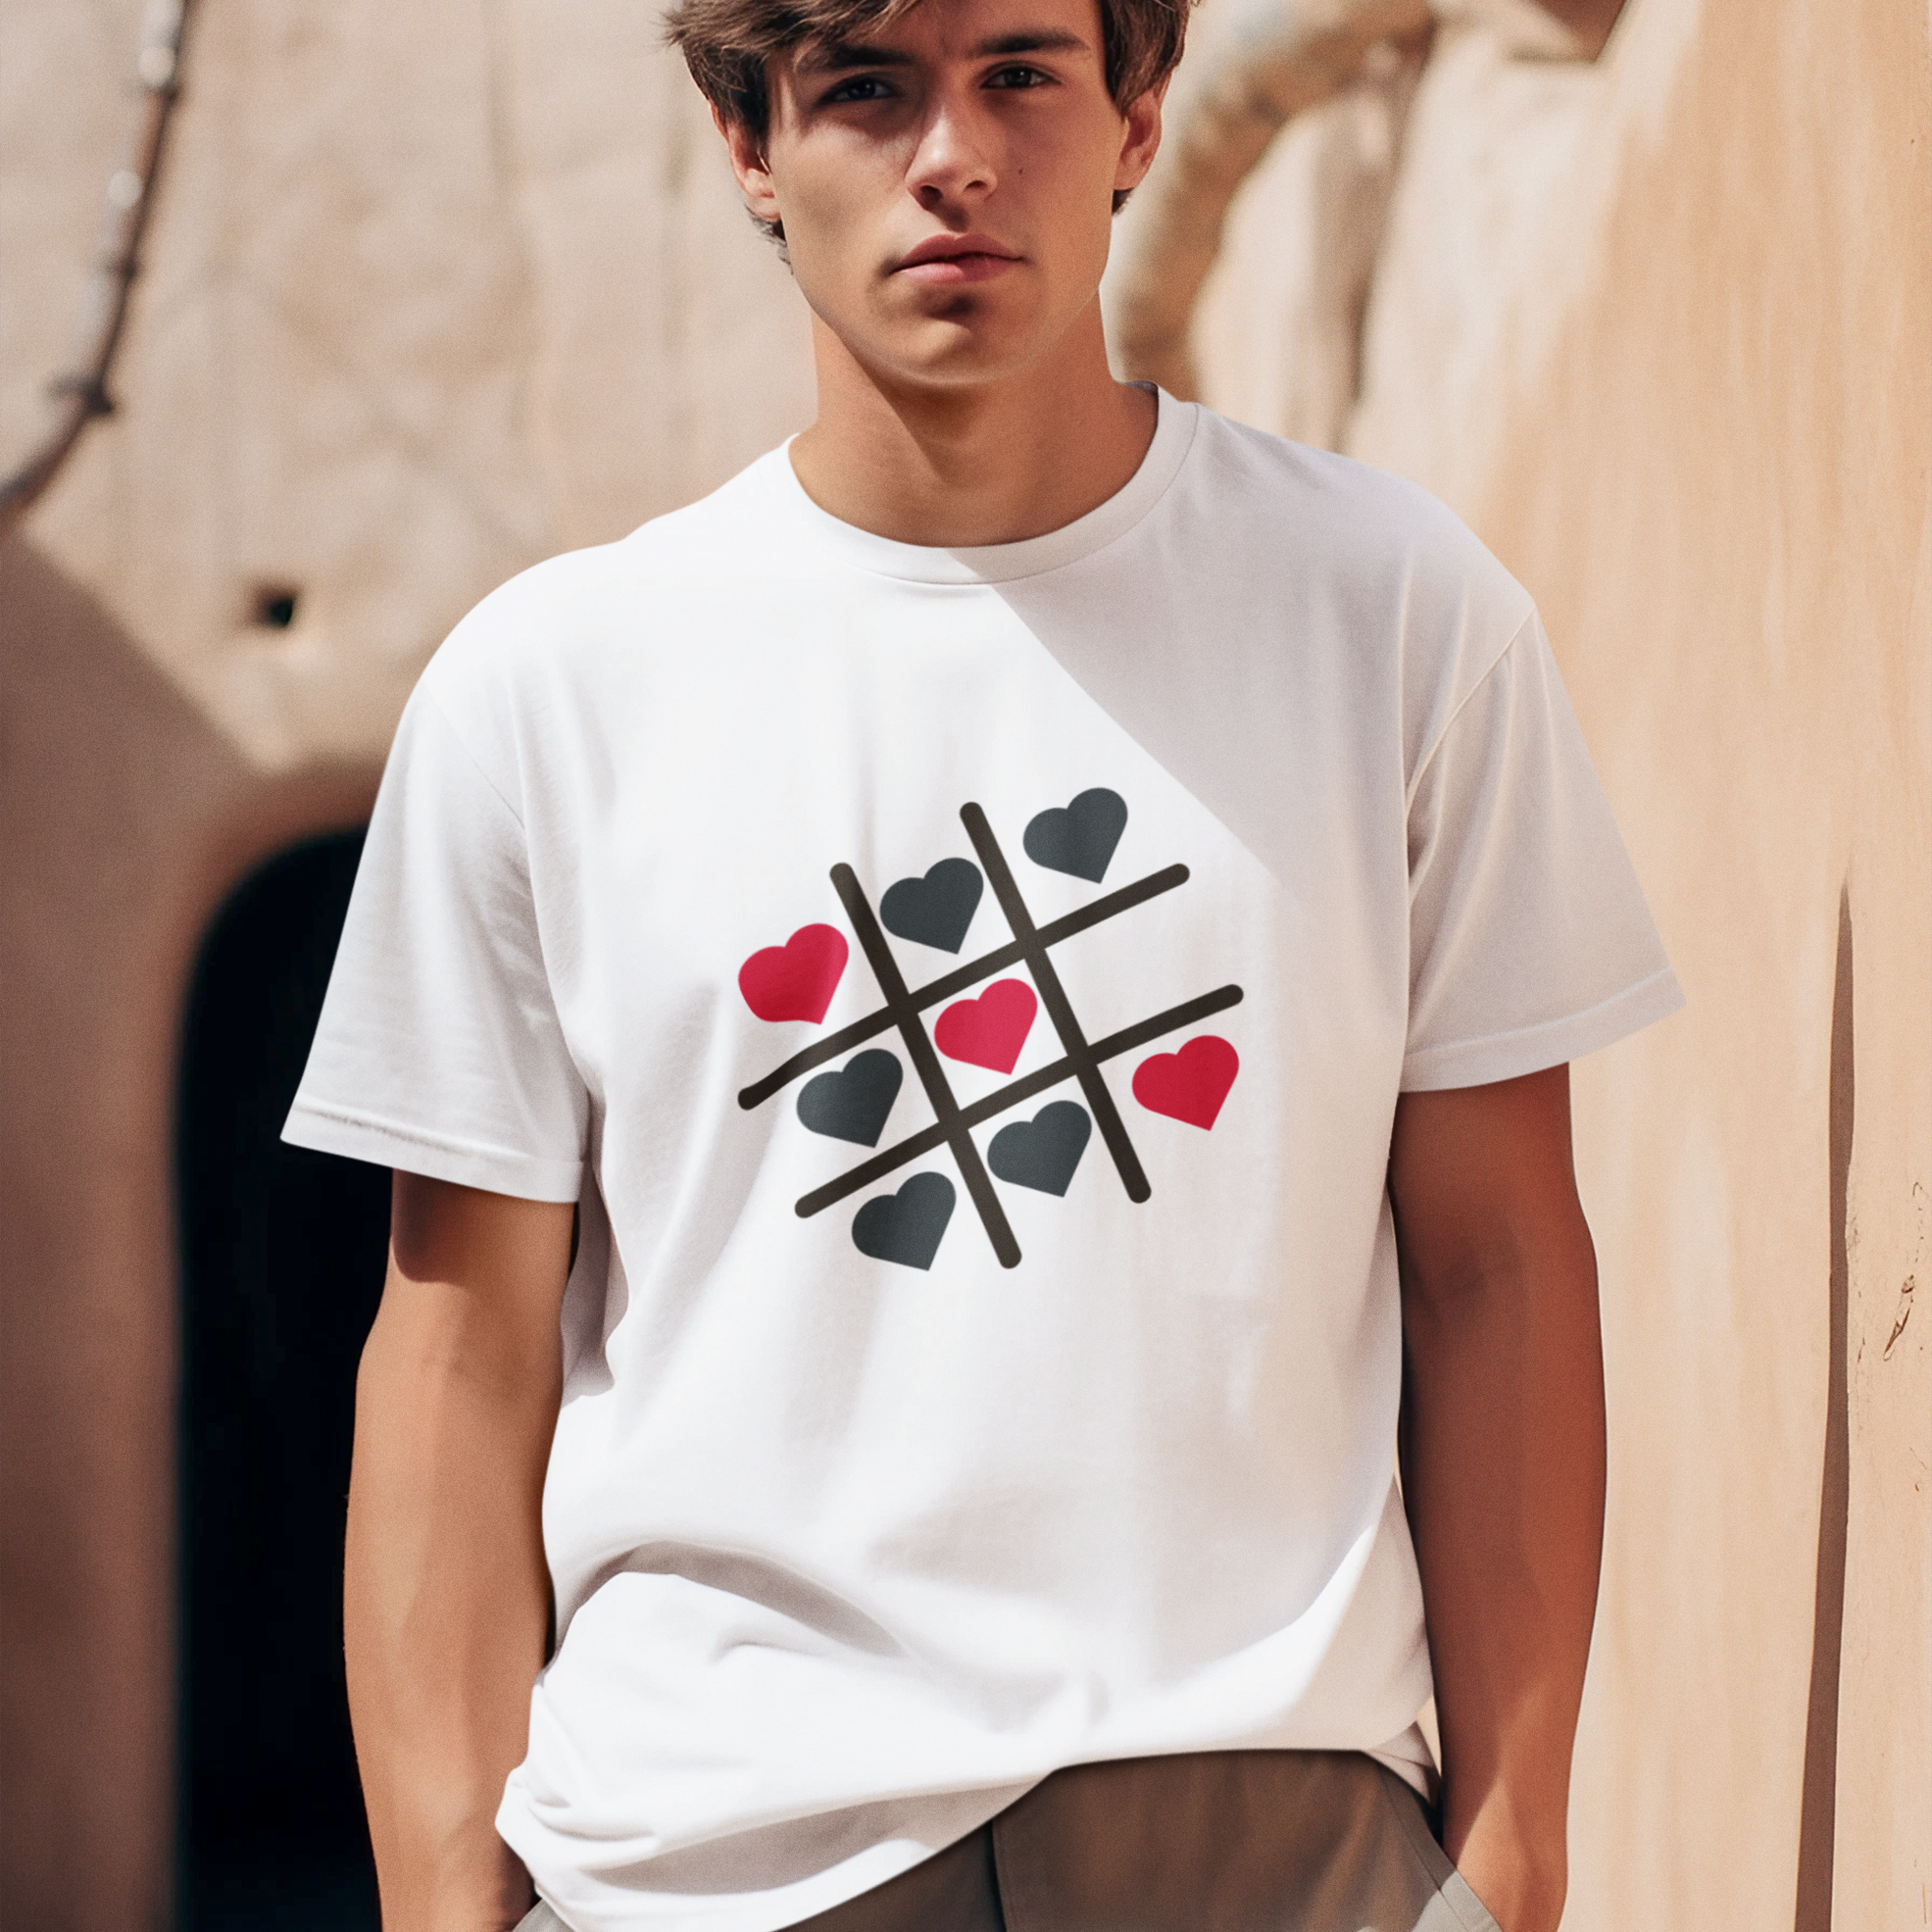 Men's Oversized Cotton Tee with Tic Tac Toe Design|Storeily